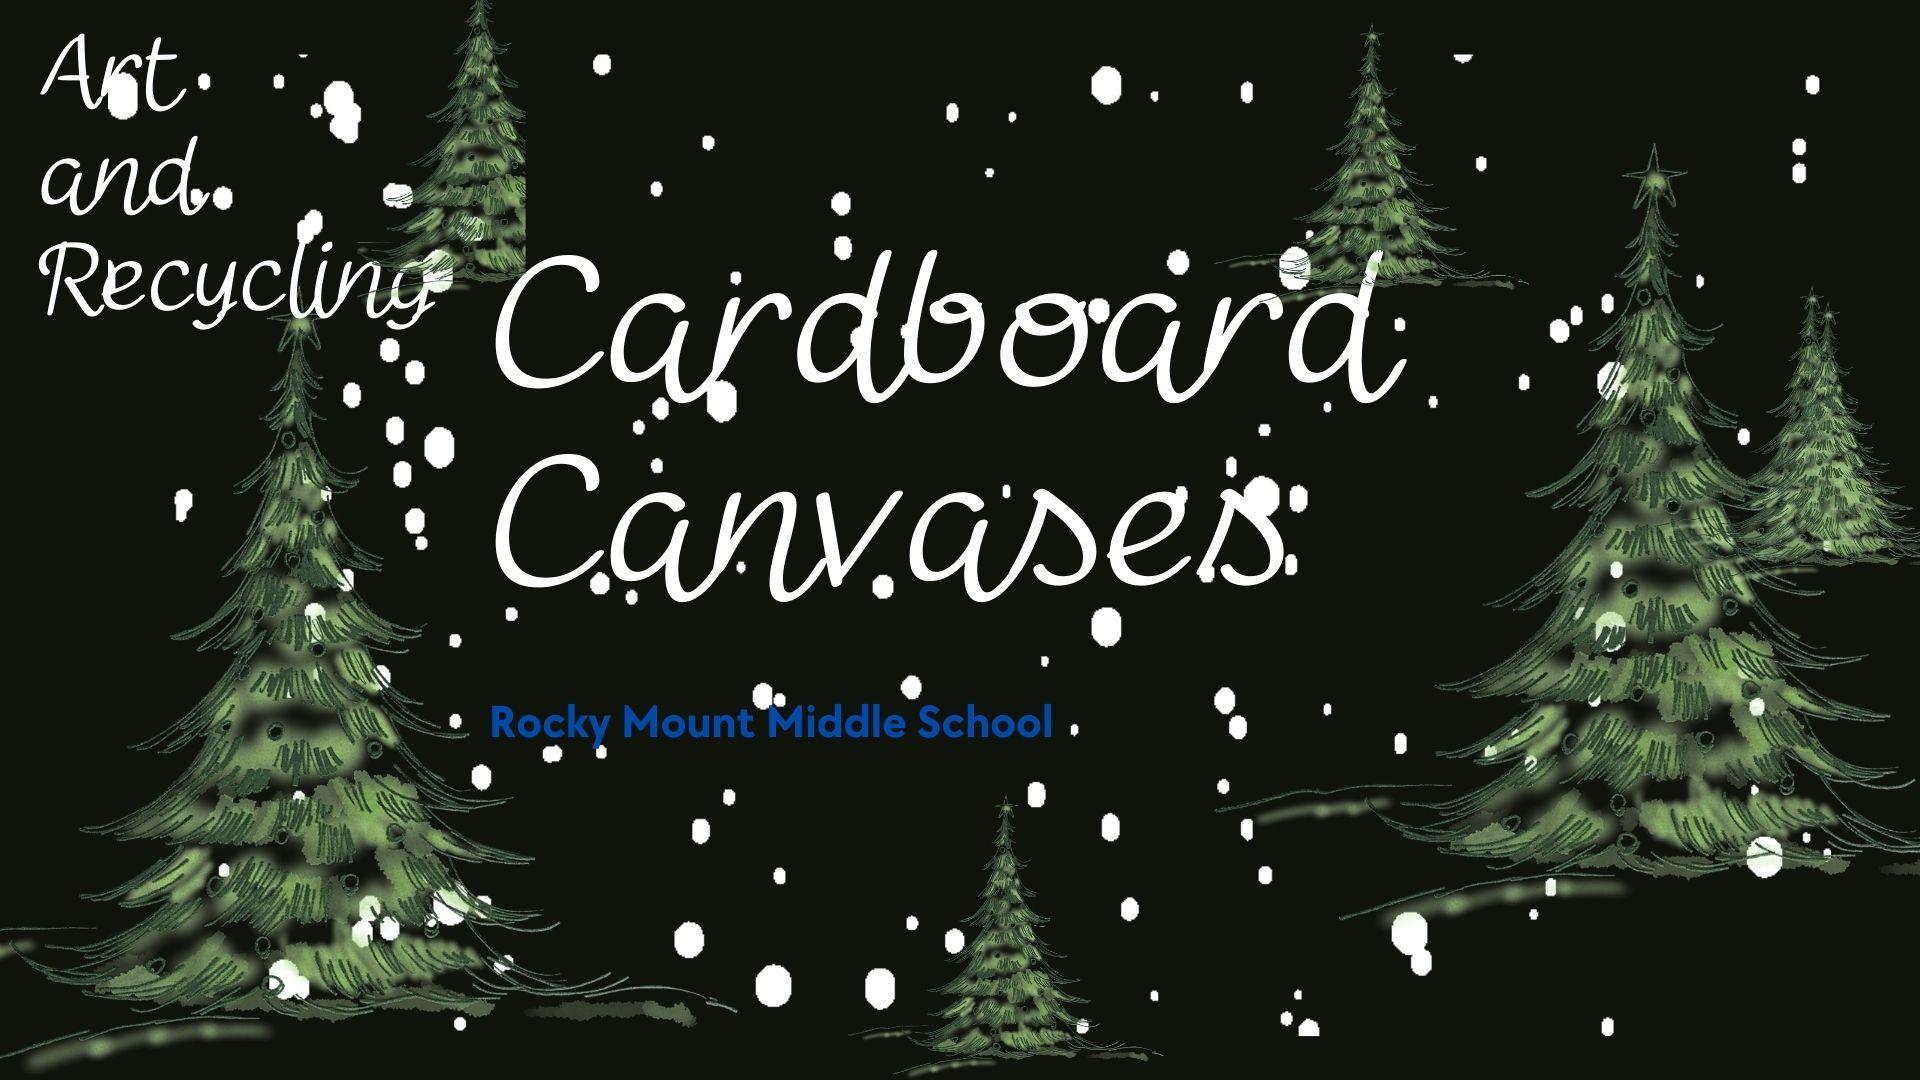 Art and Recycling - Card board canvases